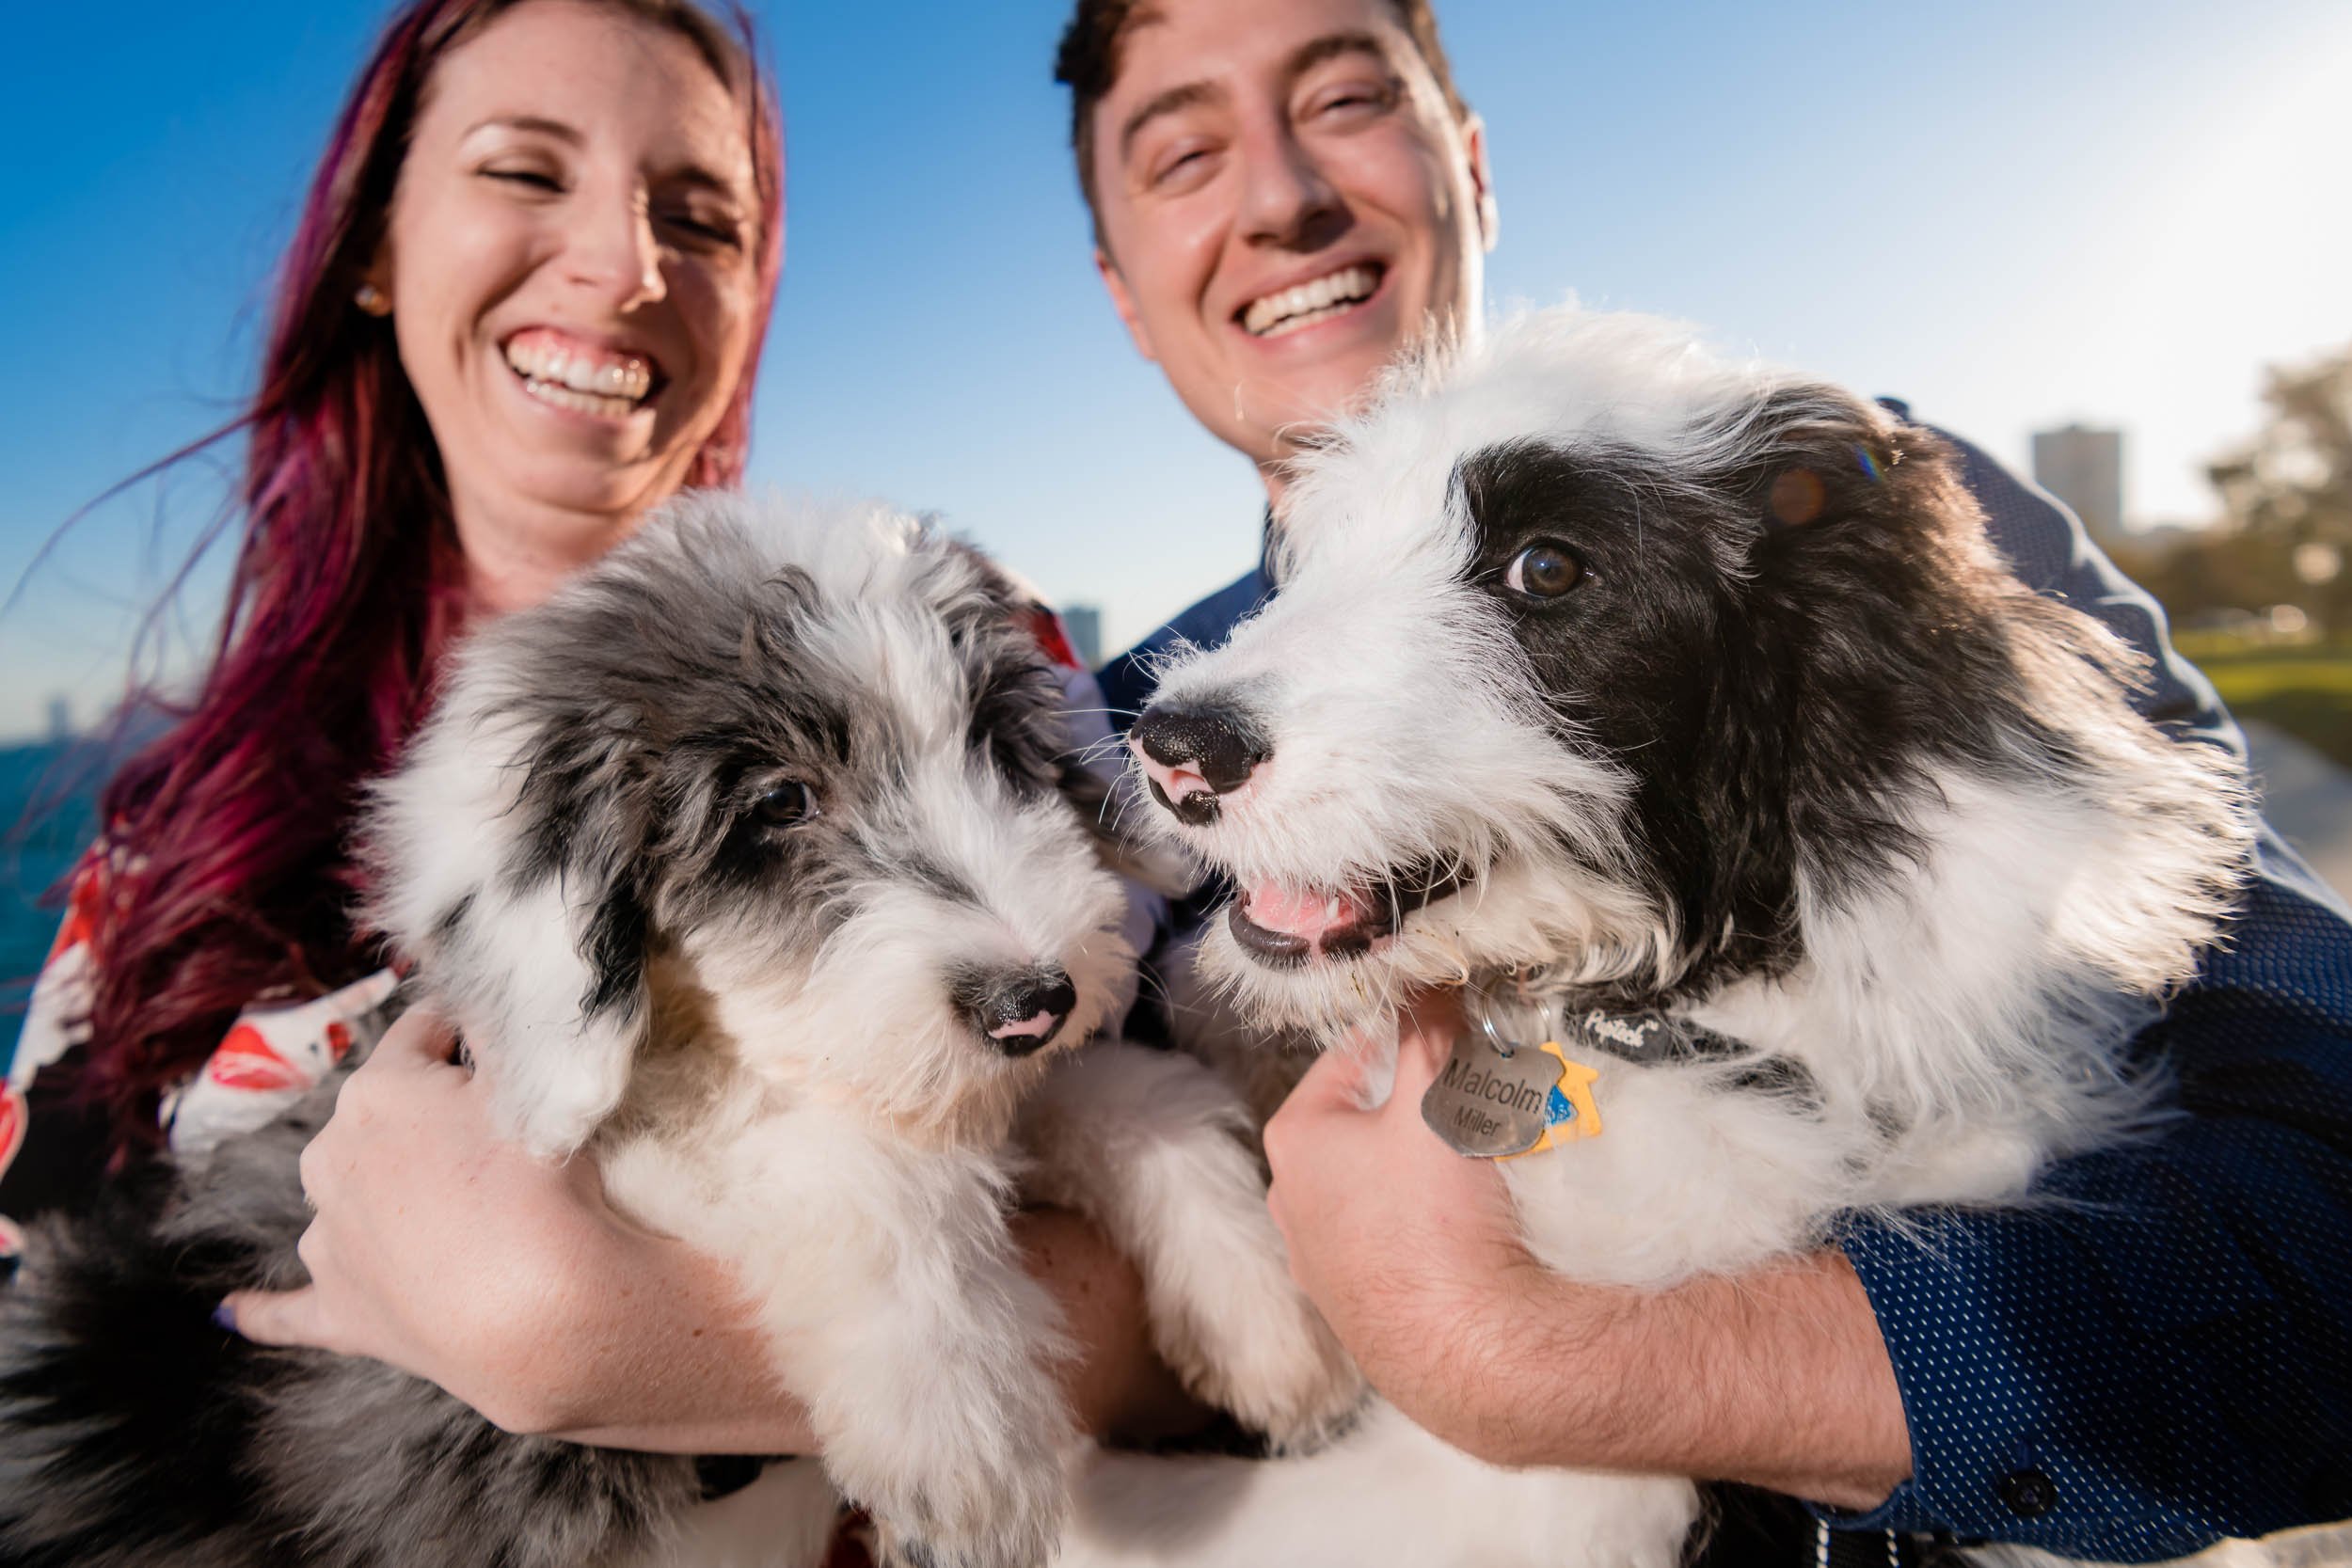 Montrose Harbor | Family Portraits With Dogs | Chicago IL